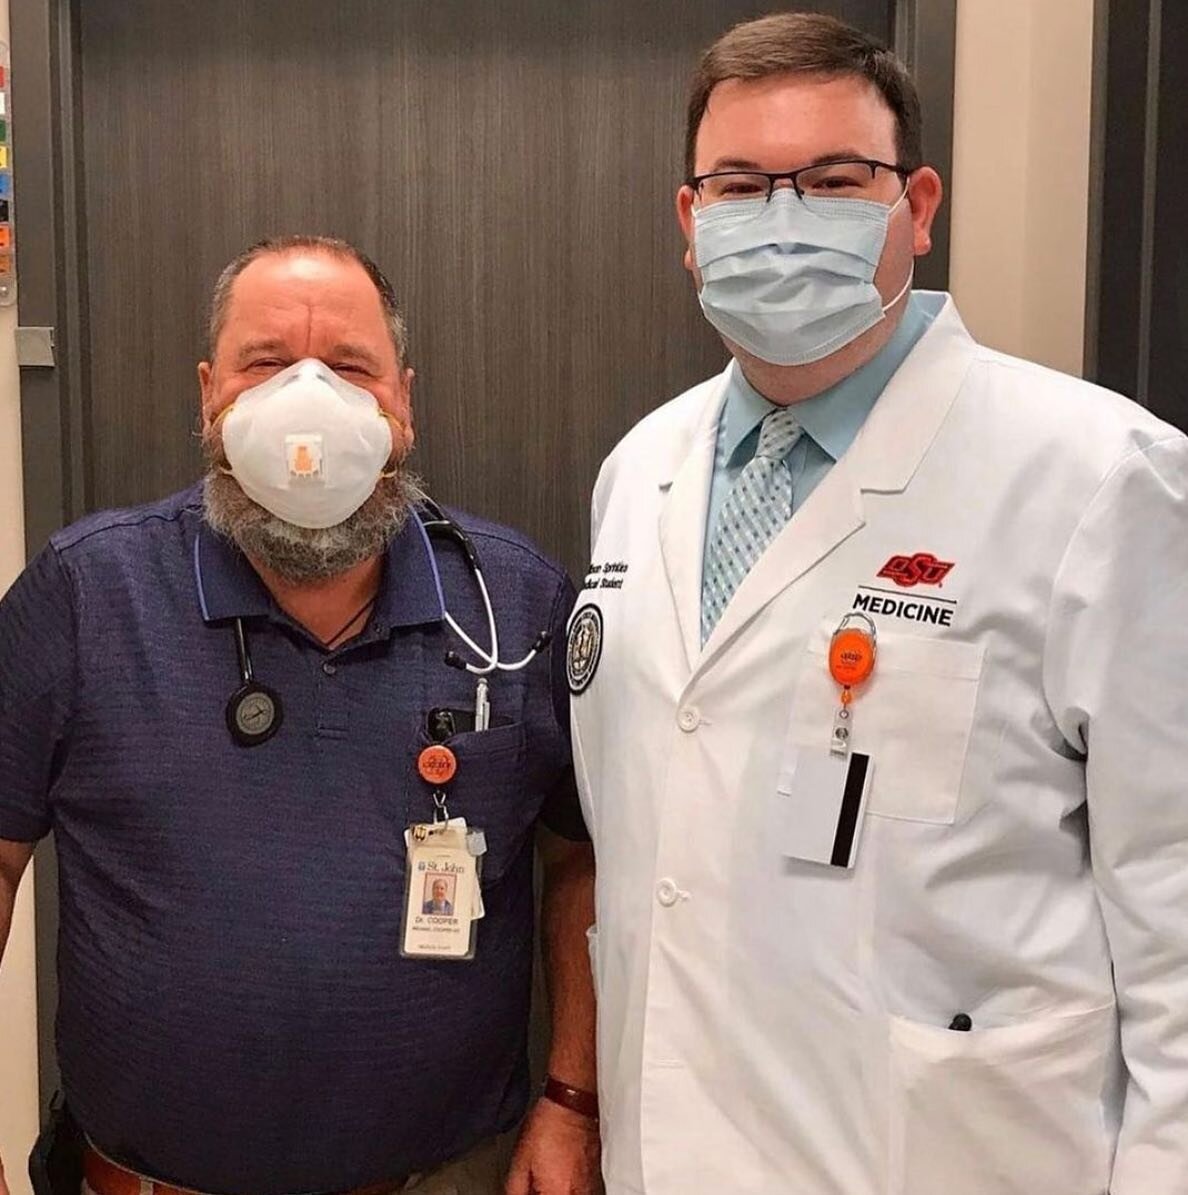 Thank you to the awesome professionals at @osumedicine for all they do, including wearing their masks! #GotMaskOK